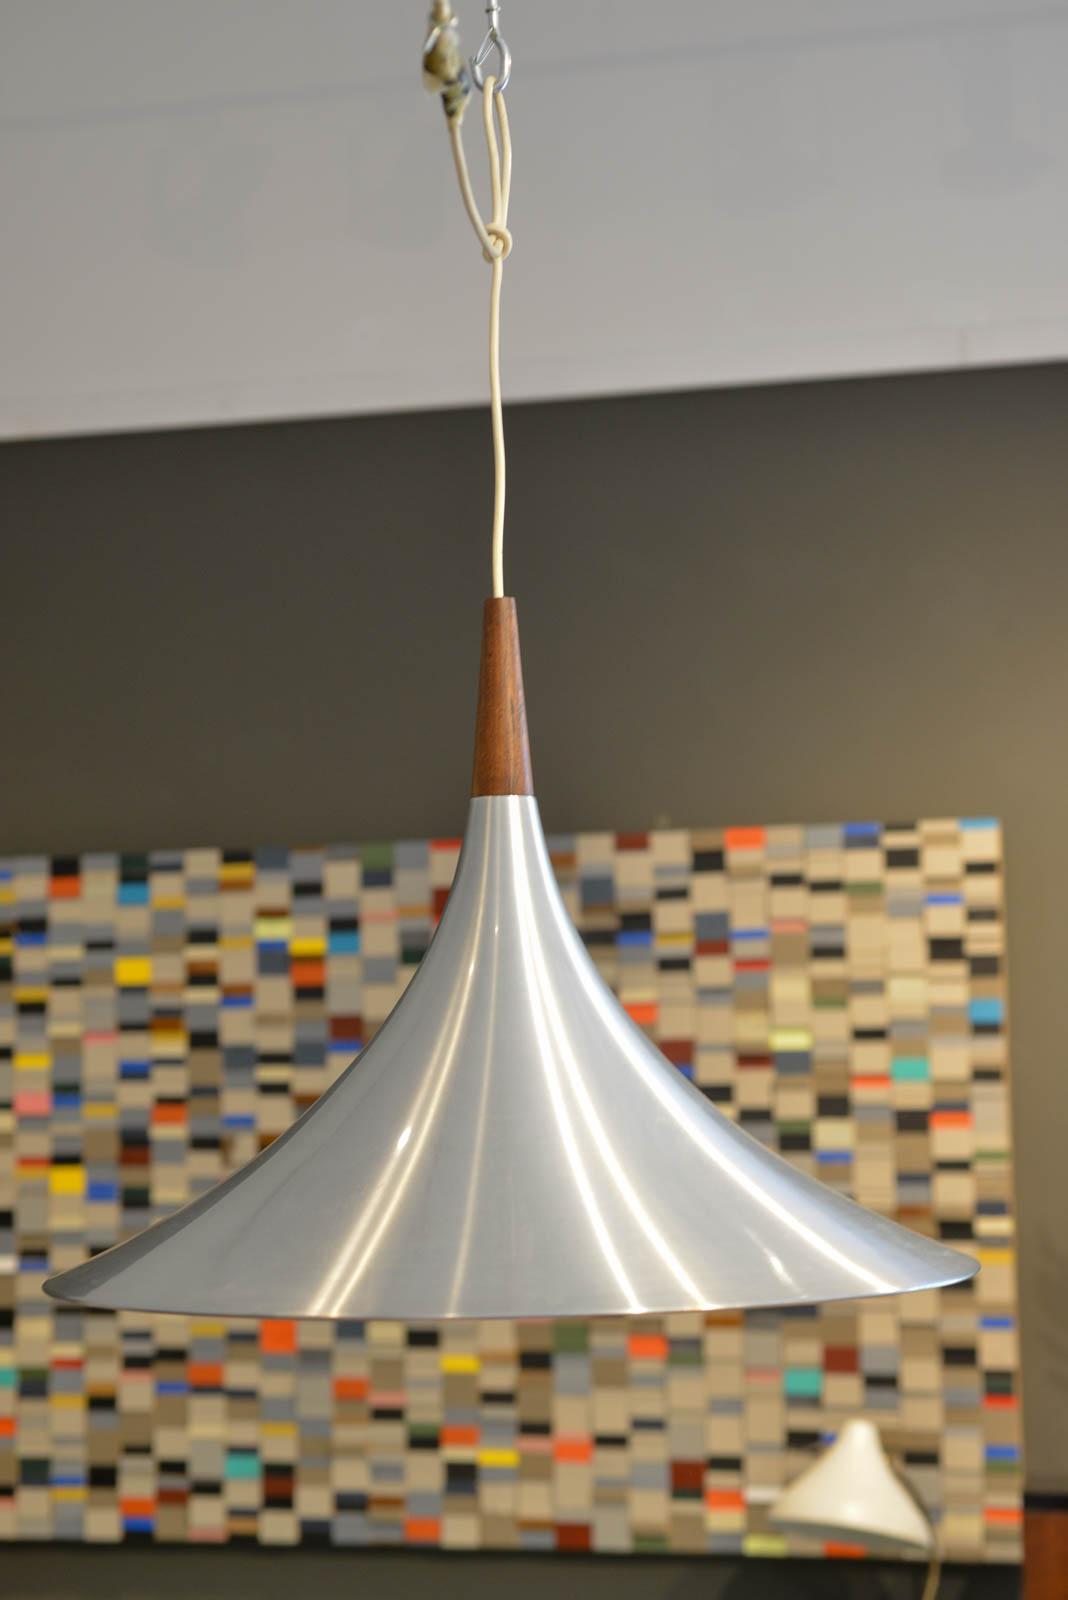 Brushed aluminum and rosewood Fluted pendant light, ca. 1970 in the style of Thorup and Bonderup for Fog & Morup. Custom made by a prominent lighting designer in Southern California for his own home, this beautiful large pendant is brushed aluminum